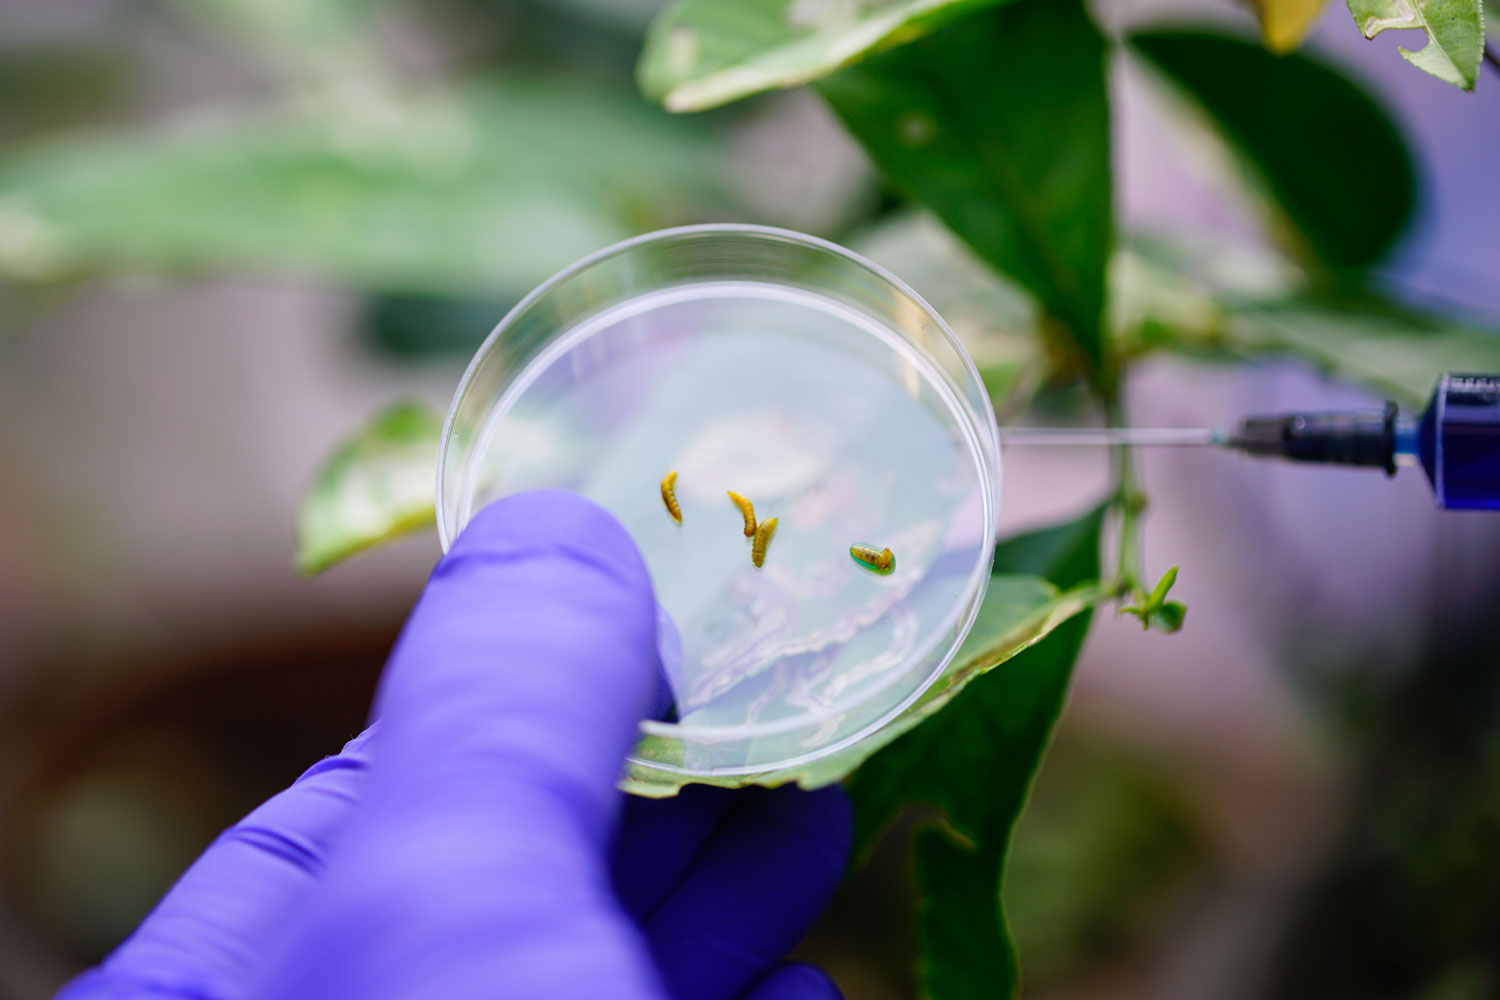 A scientist collecting larvae and placing them on a petri dish